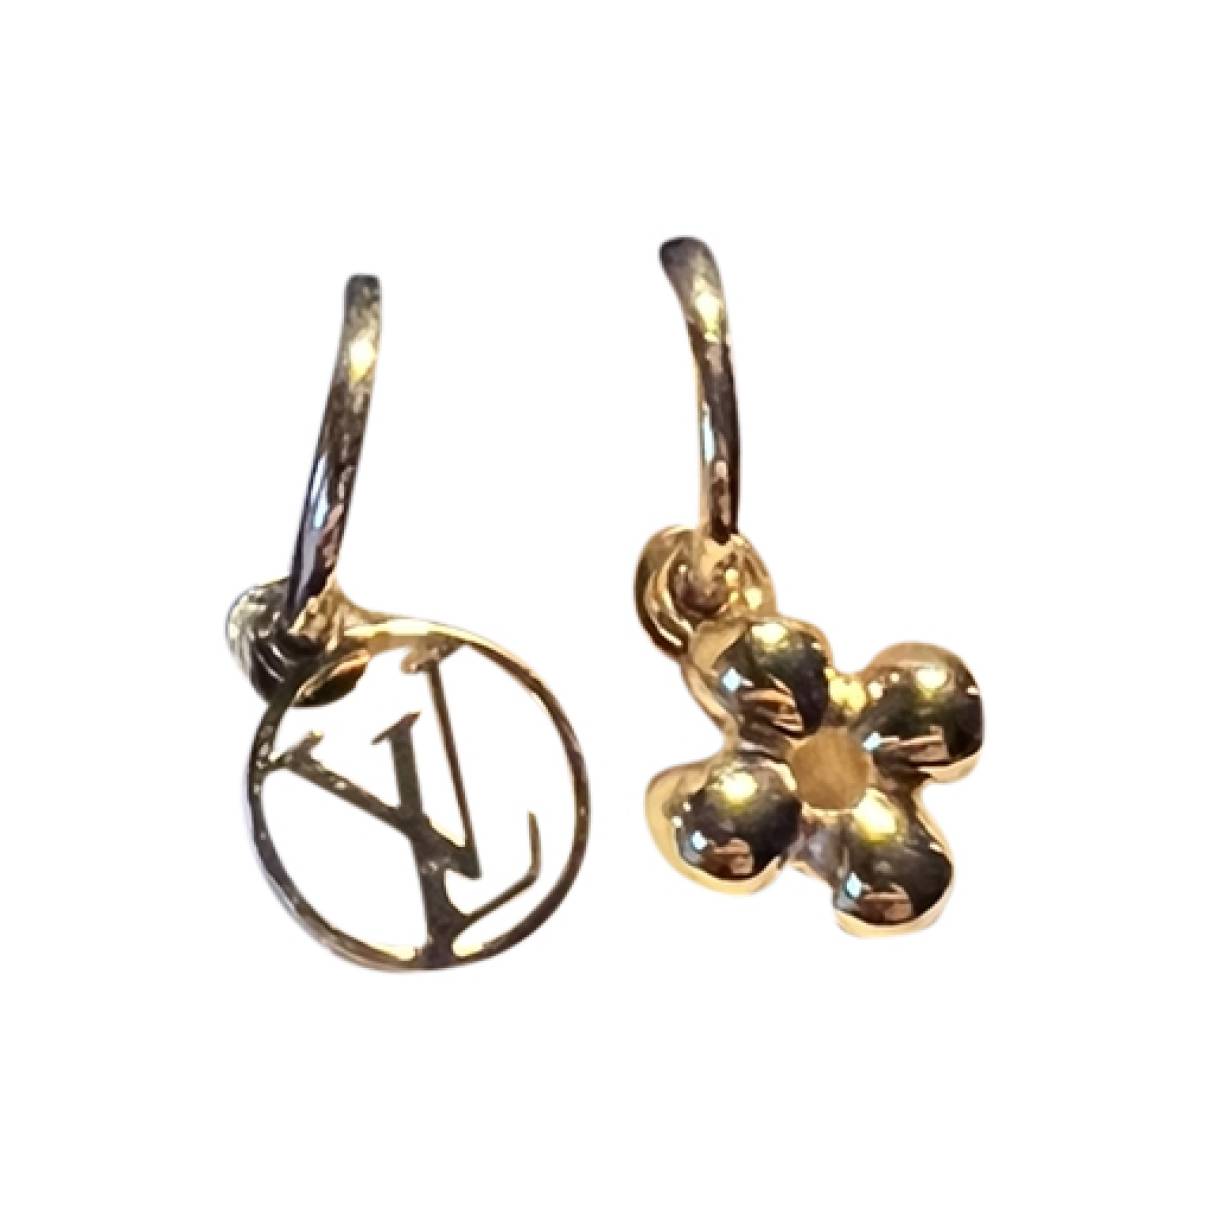 Louis Vuitton - Authenticated Earrings - Gold for Women, Never Worn